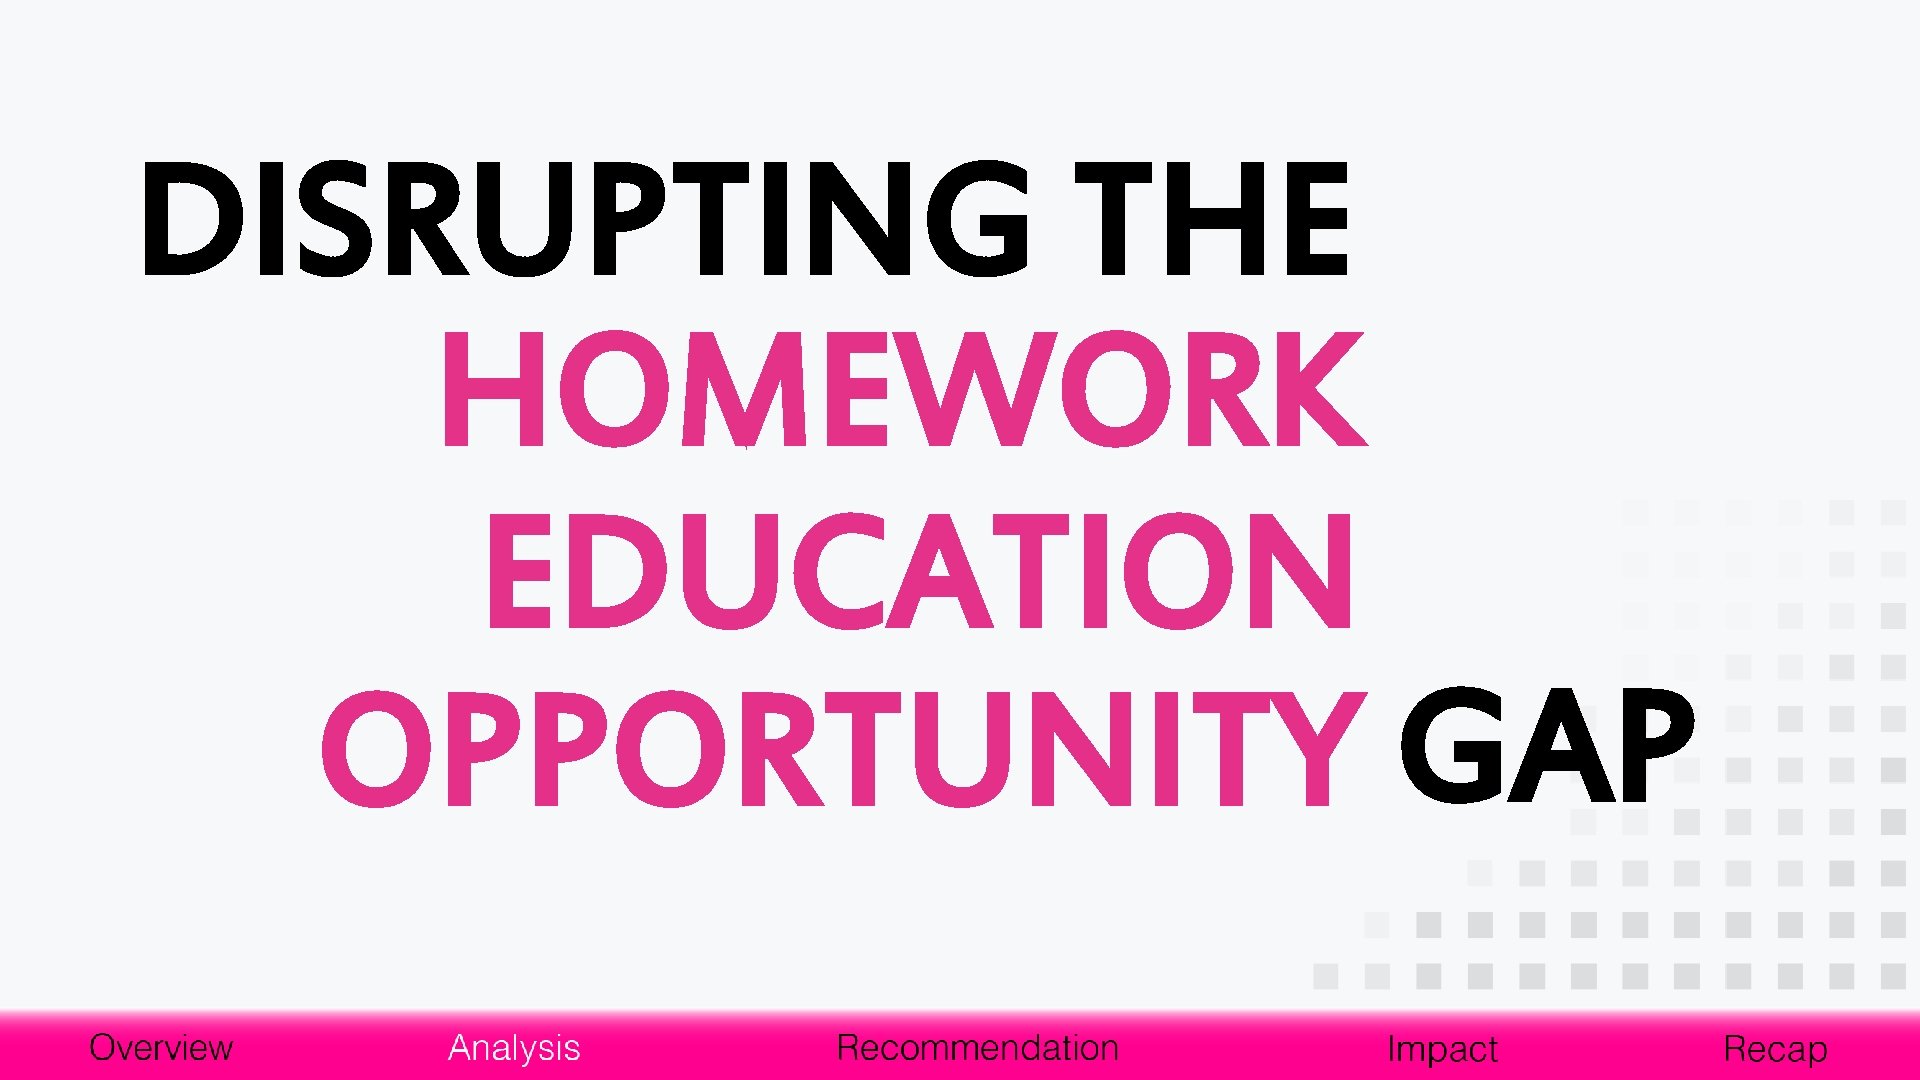 DISRUPTING THE HOMEWORK EDUCATION OPPORTUNITY GAP 